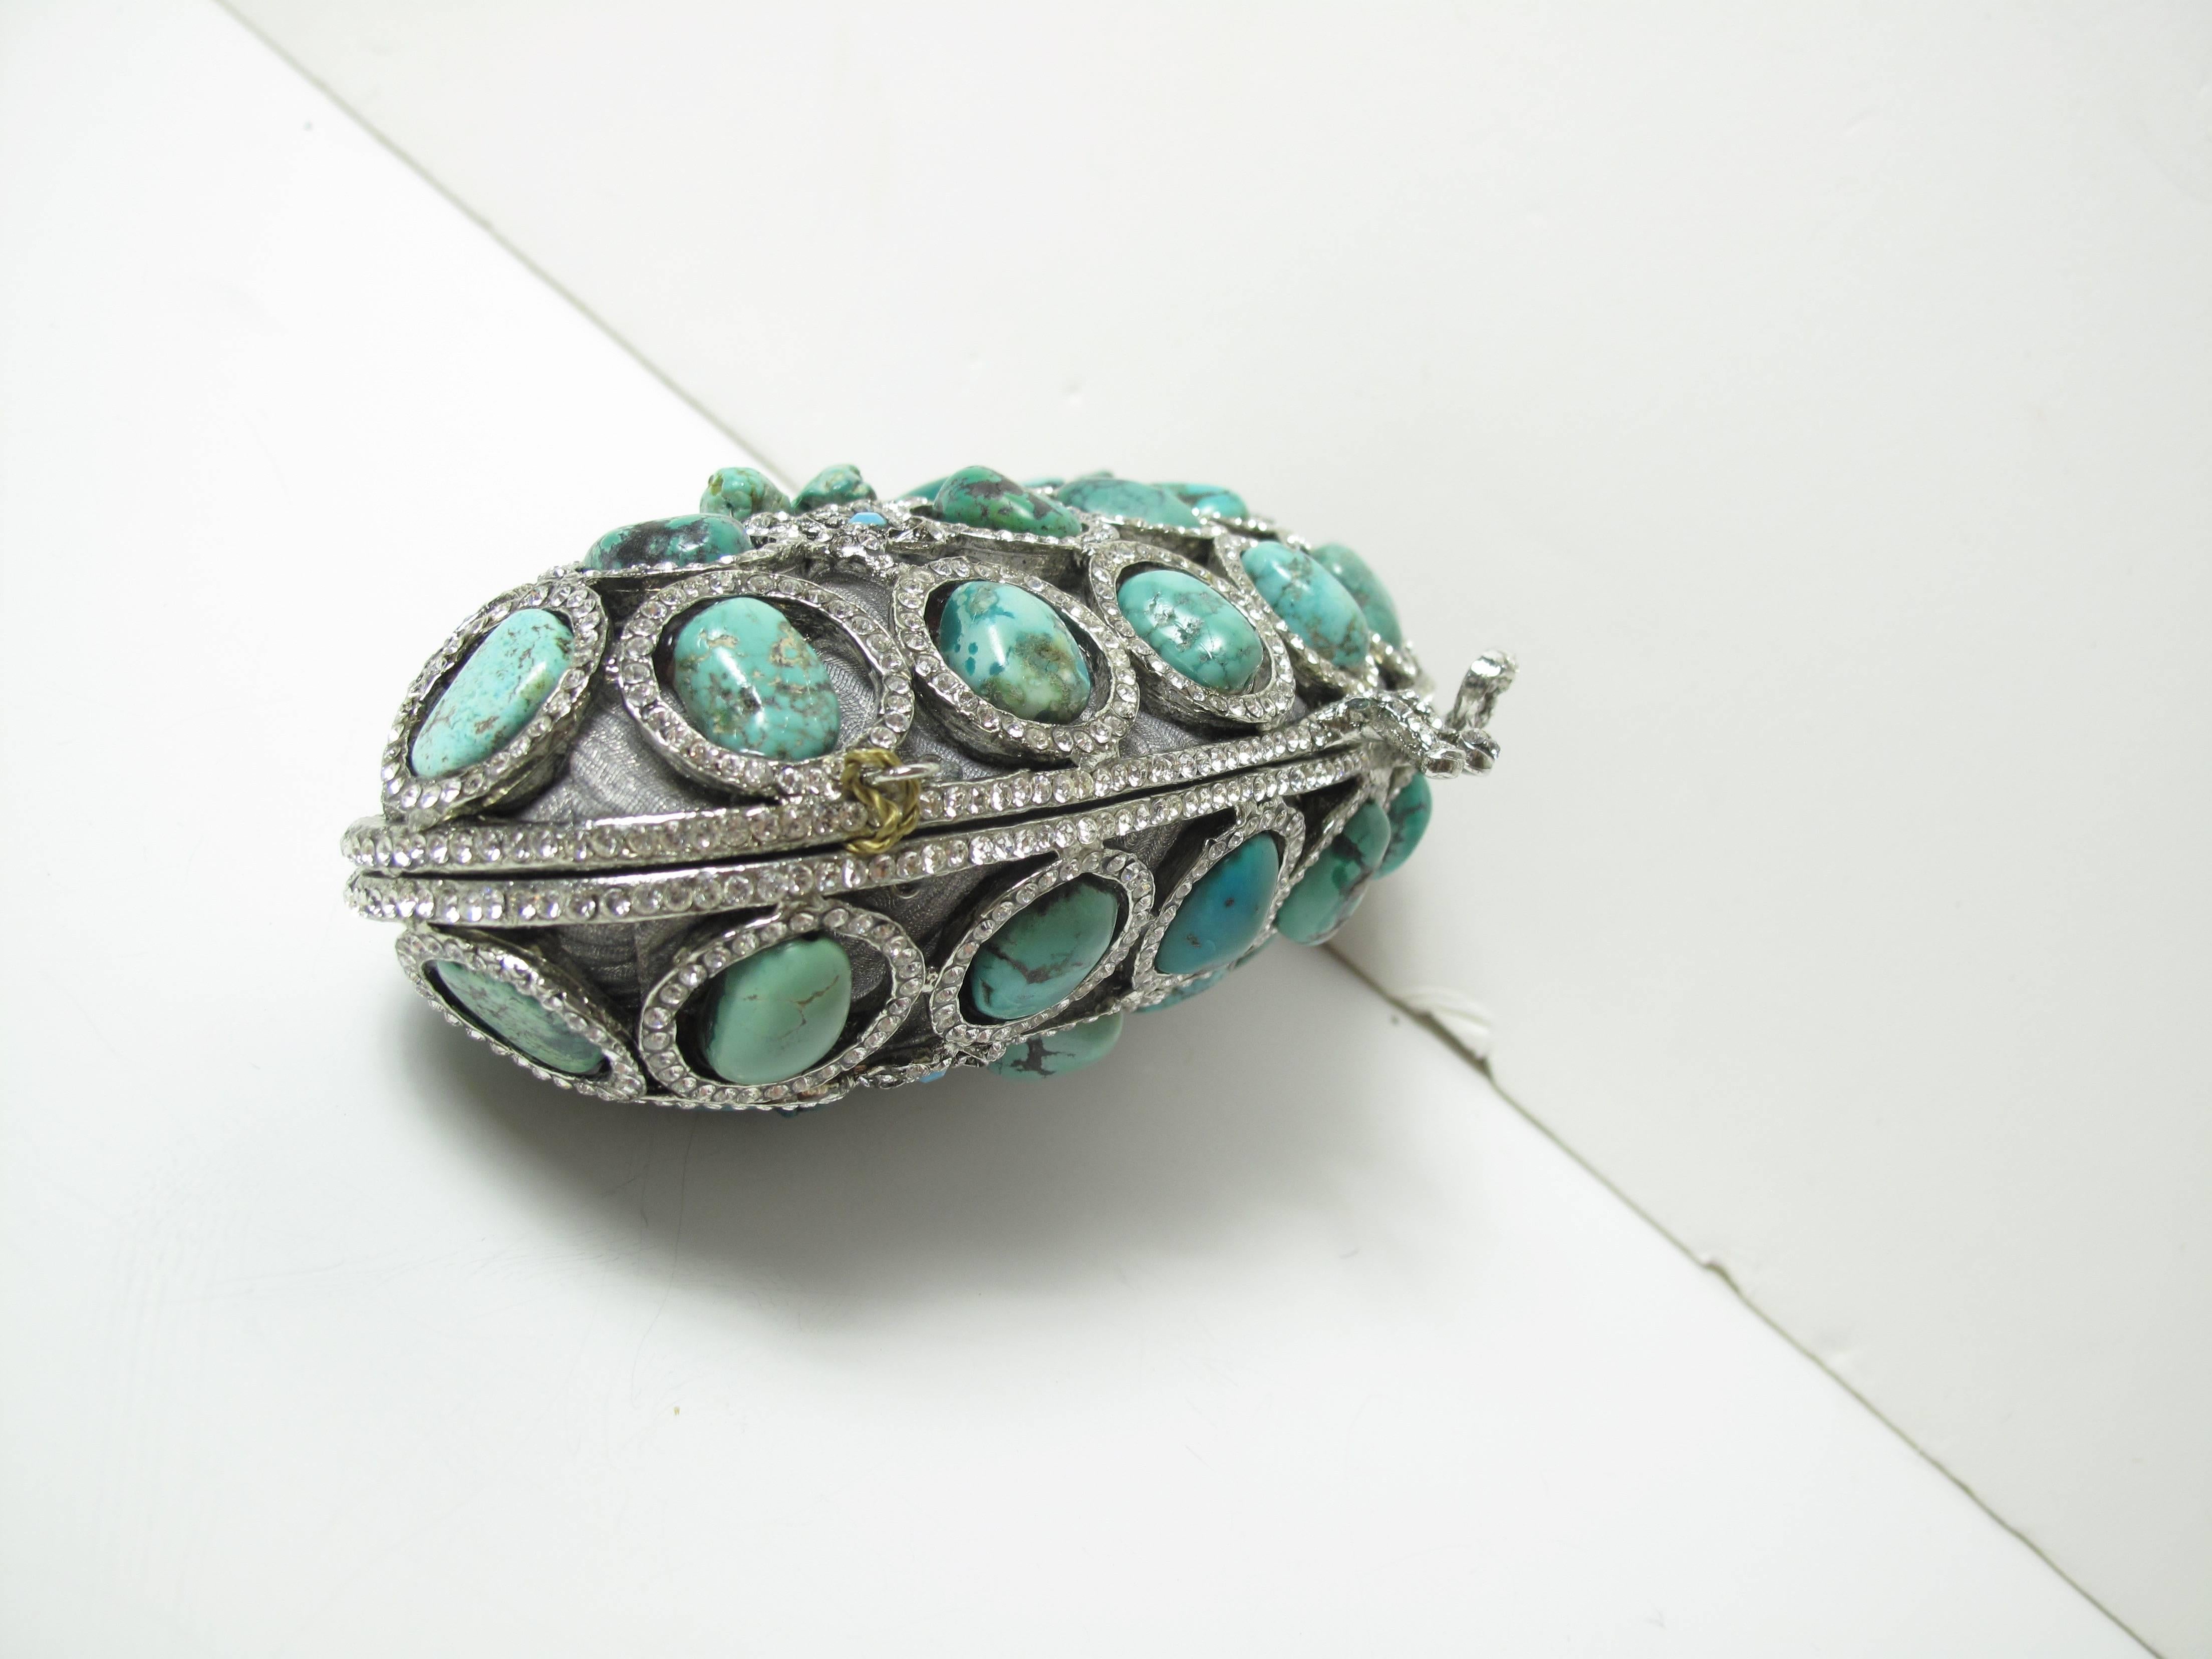 Edidi turquoise and Swarovski crystal evening bag. 

Small diamantes and jade beading set on beautiful ribbon-like silver design.
Beaded jade double strand handle is removable adding versatility to this clutch/handbag.
Lined in fine silver